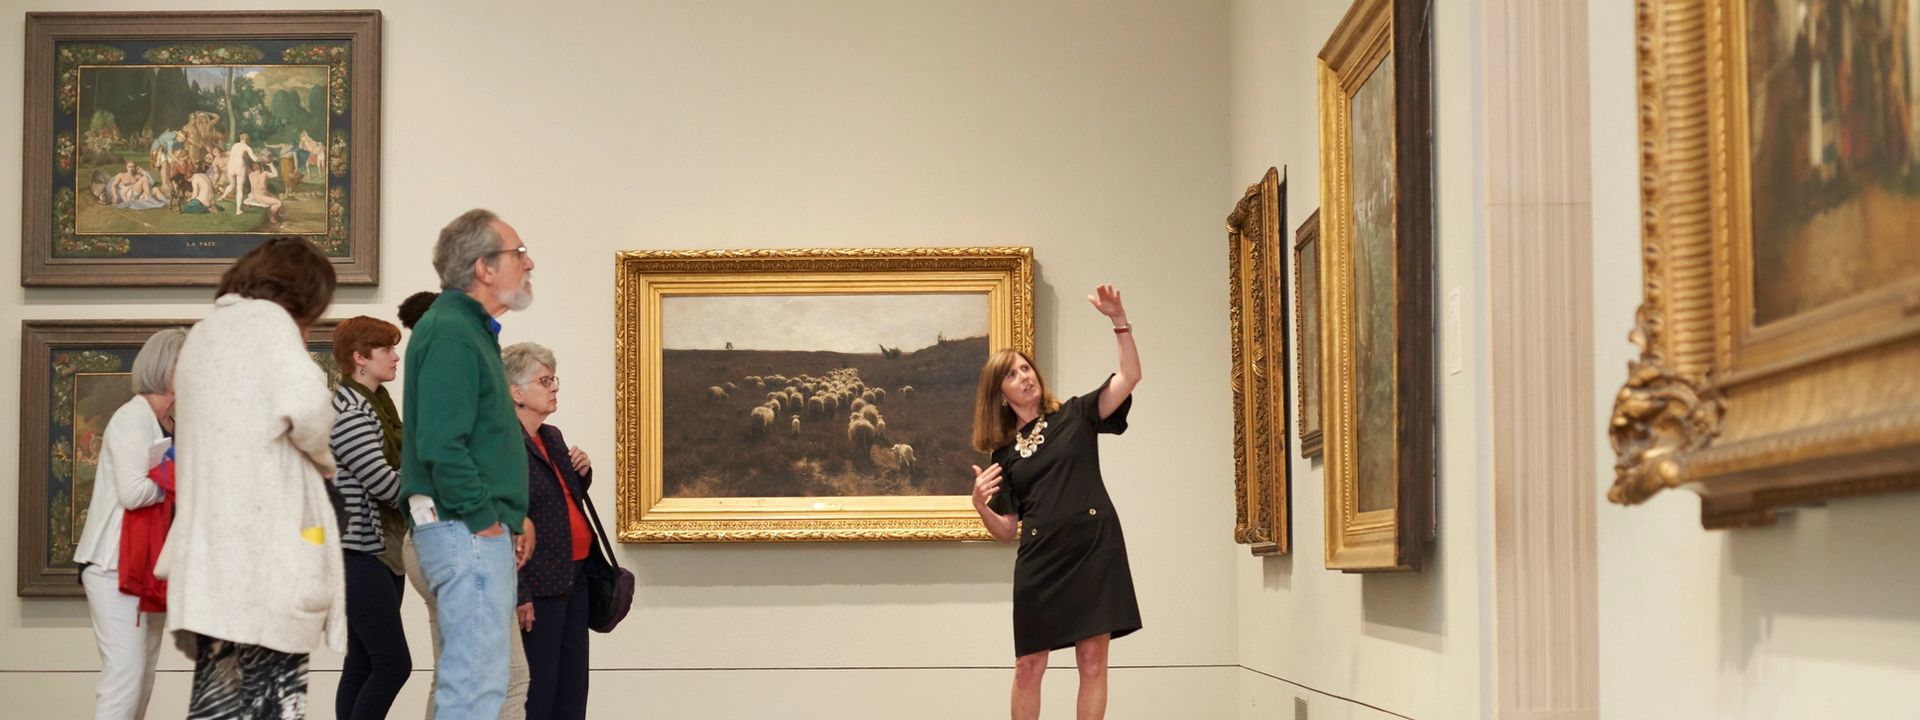 A museum guide leading a tour group and pointing up to a painting